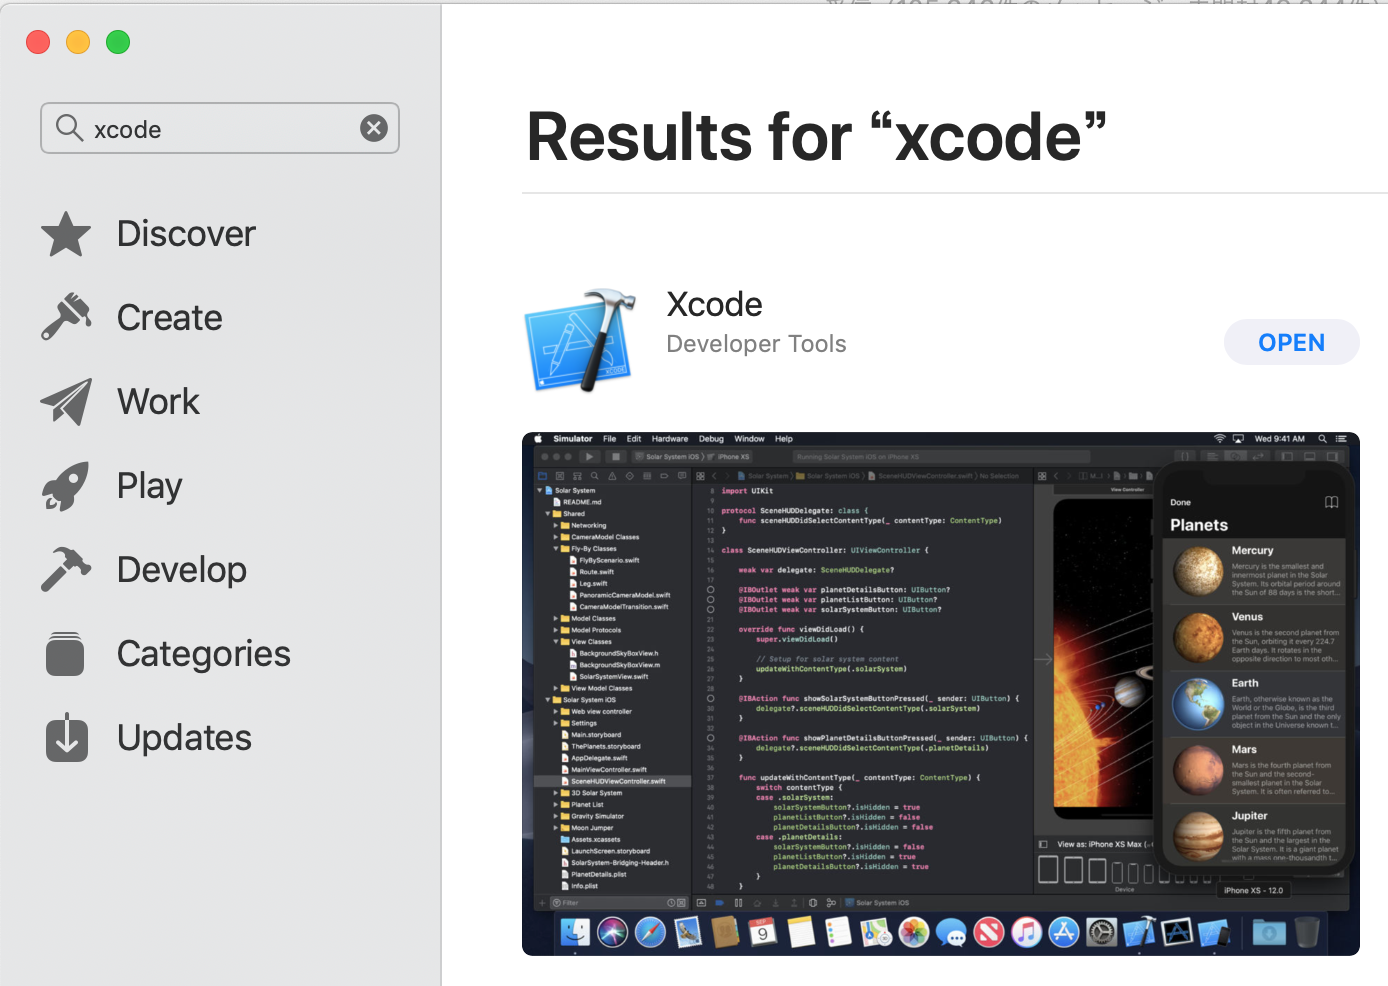 xcode select install command line tools